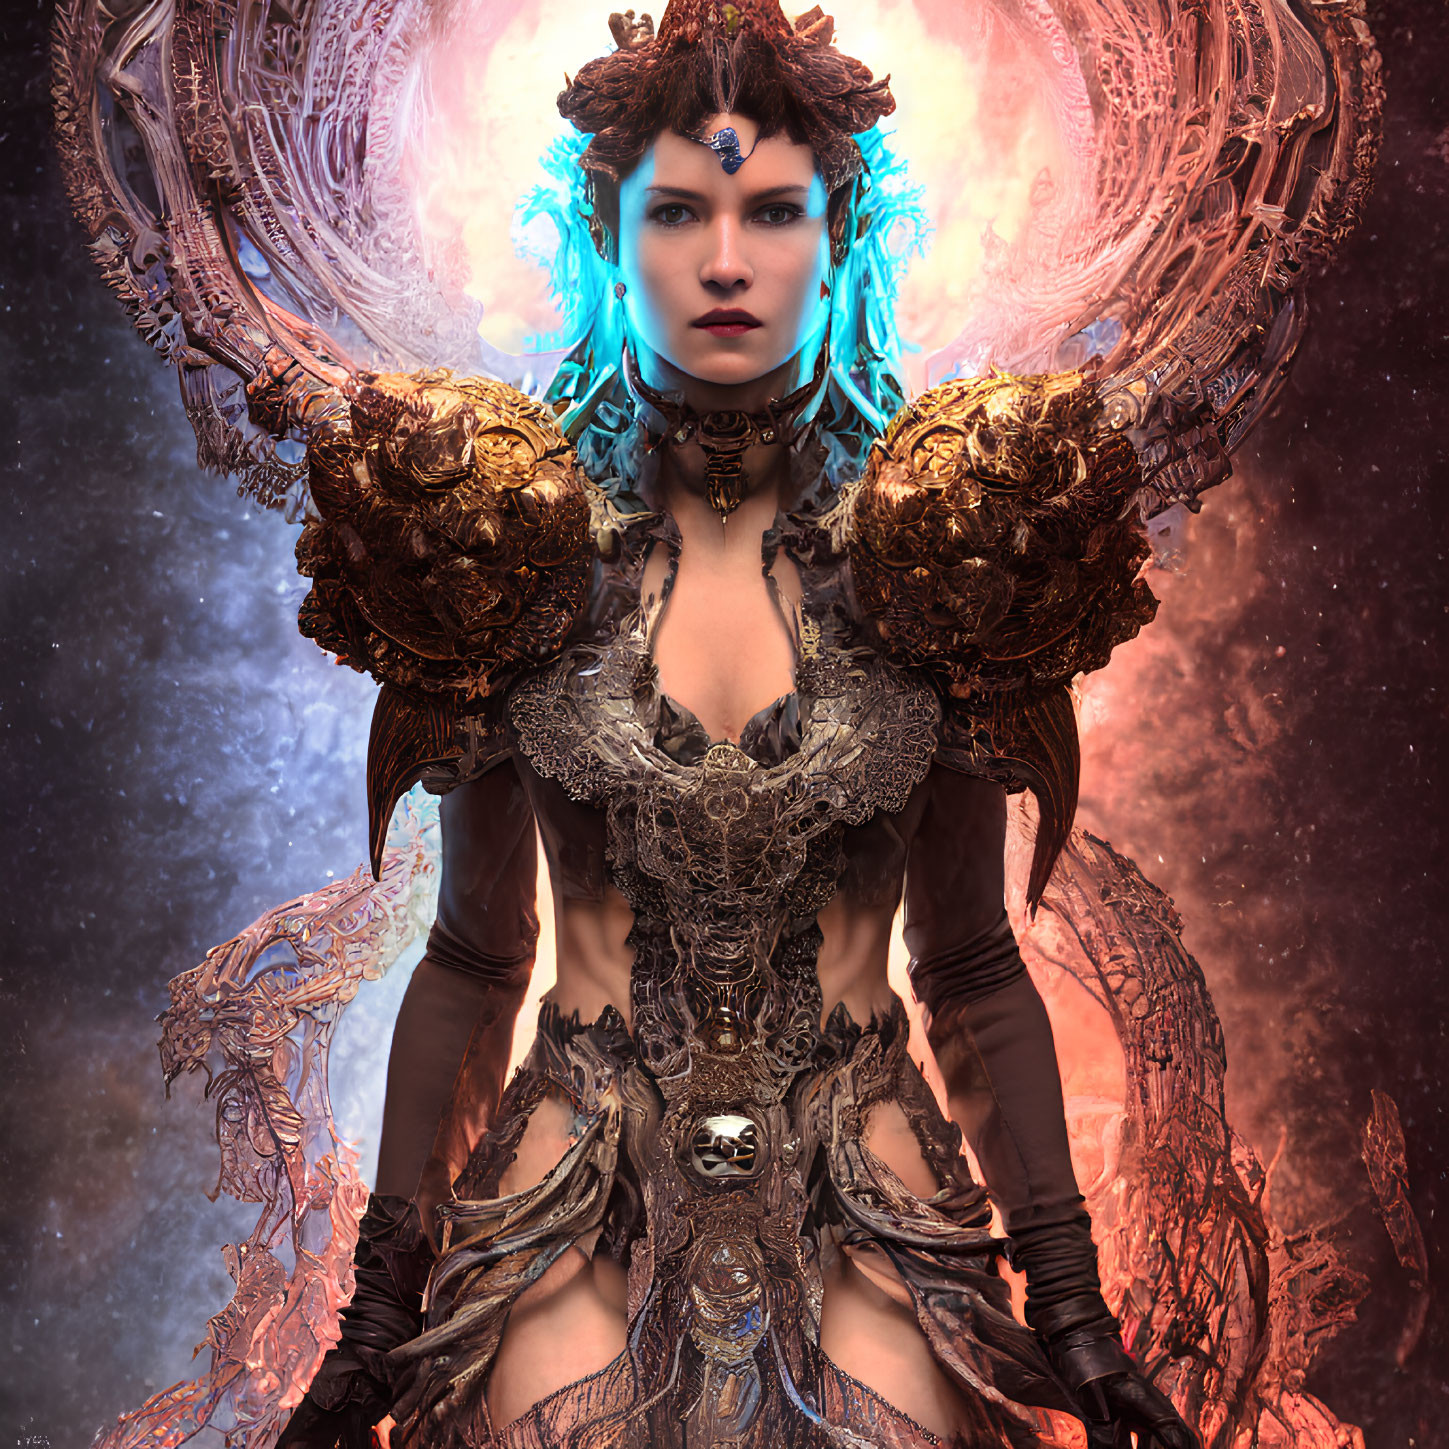 Woman in Gold and Silver Armor with Glowing Orb in Cosmic Setting